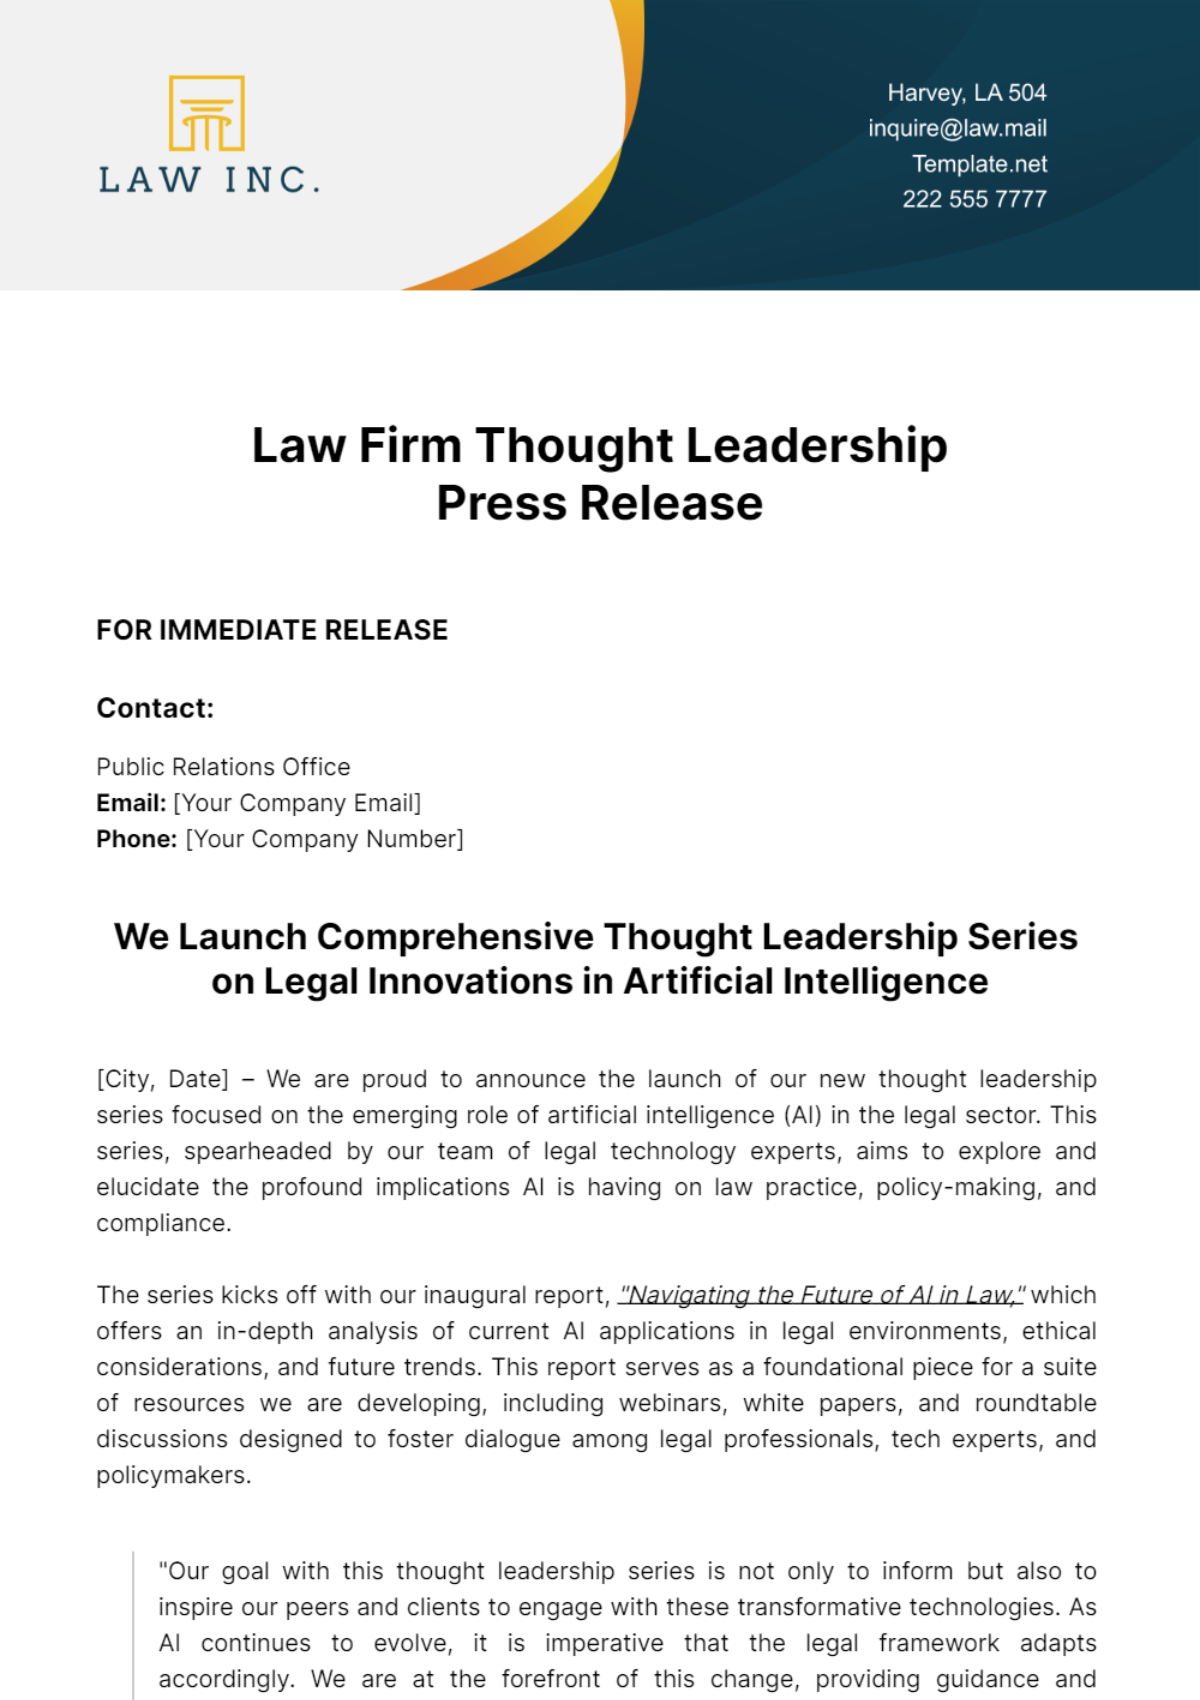 Free Law Firm Thought Leadership Press Release Template